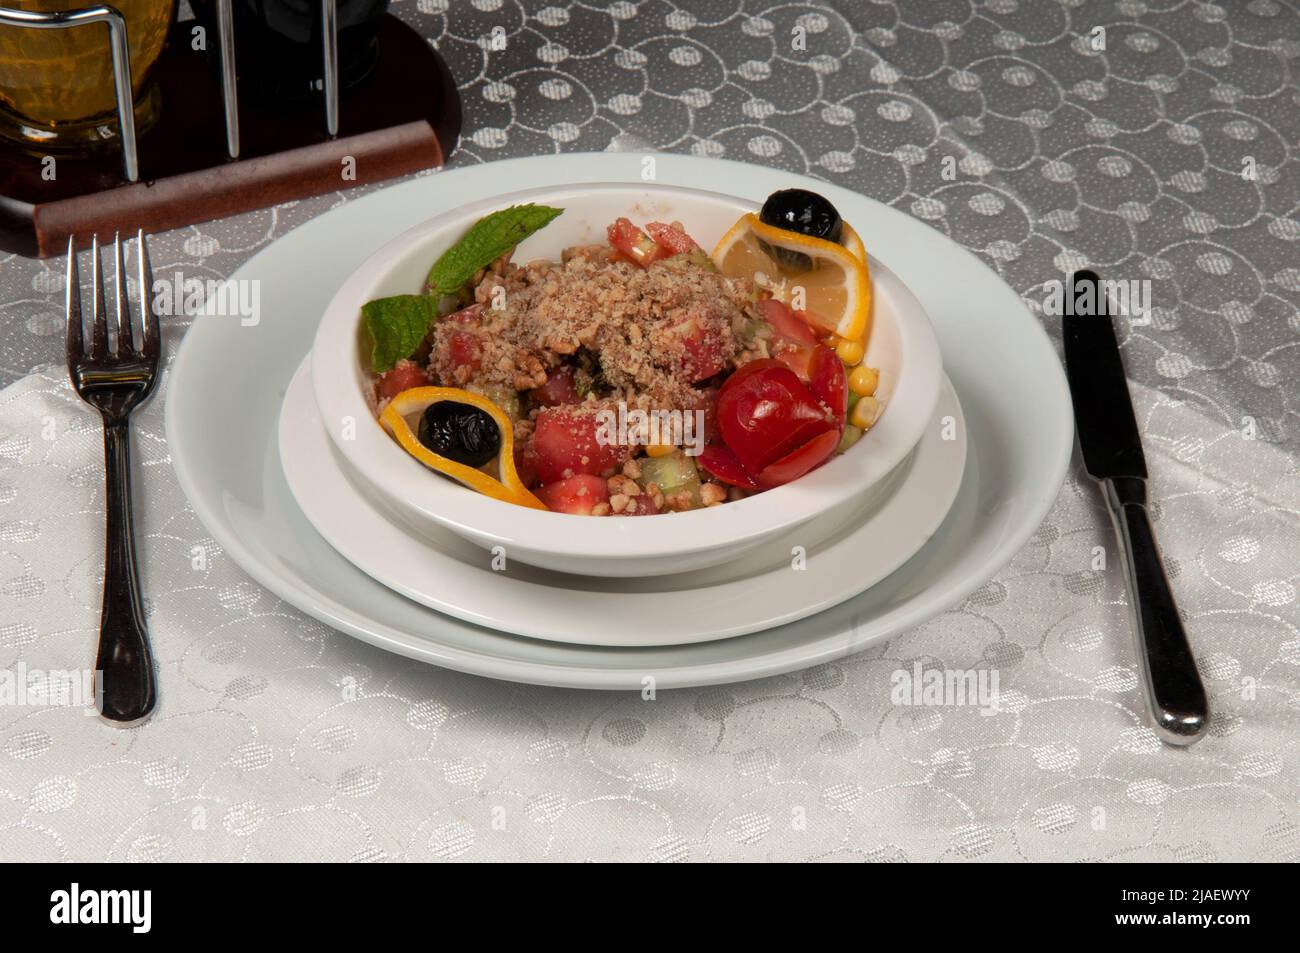 A plate of salad made of lettuce, tomato, corn, carrot, lemon and dill. Salad plate on the dining table. Stock Photo